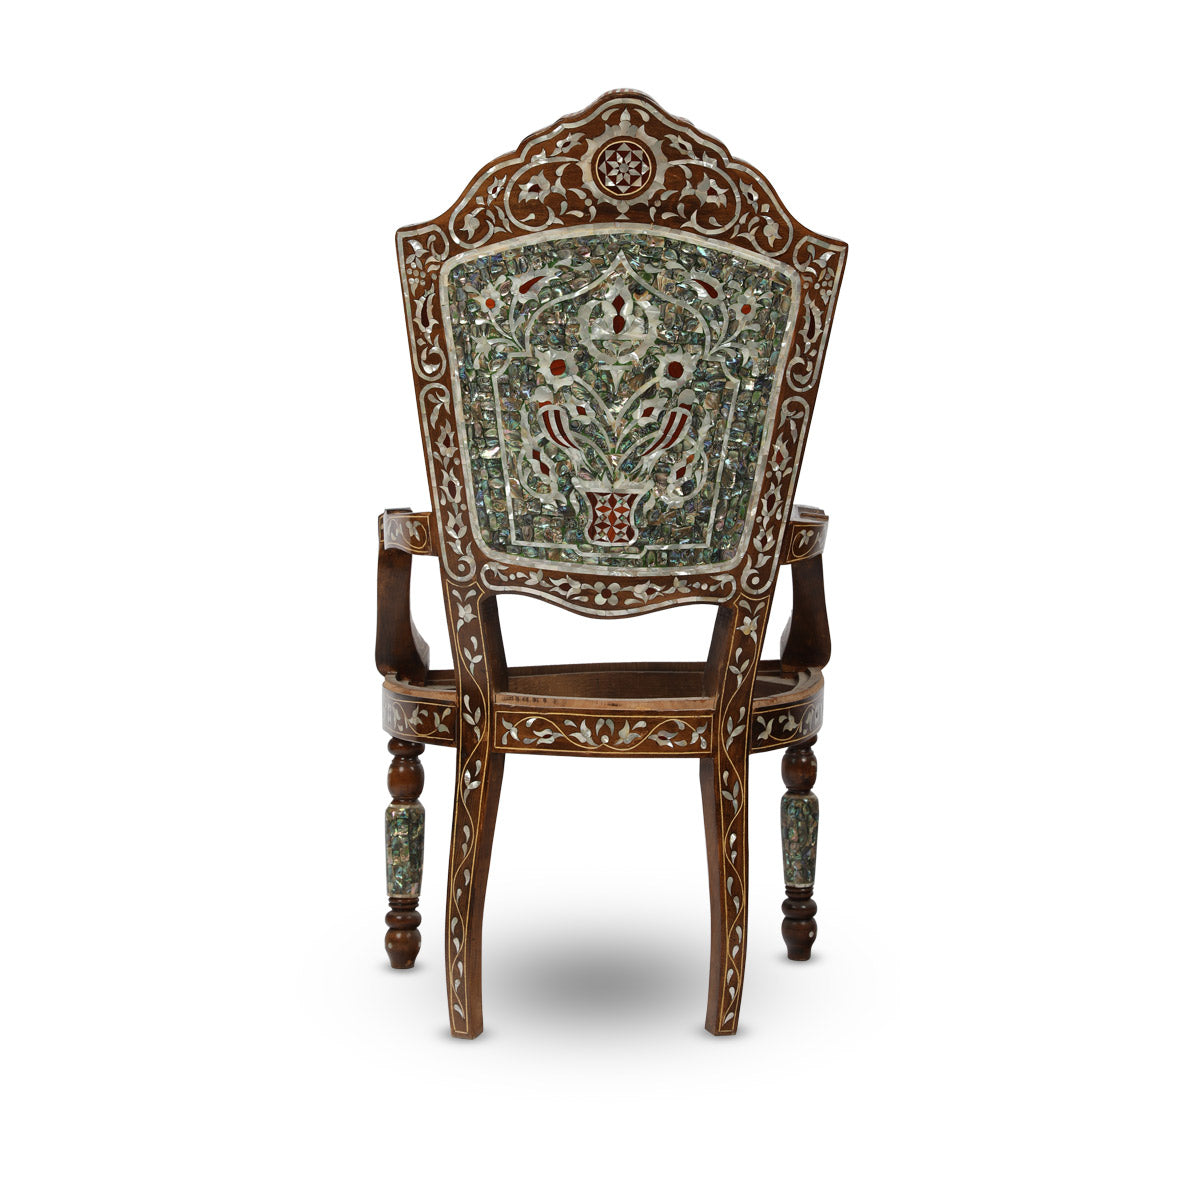 Back View of Royal Arabic-Design Armchair